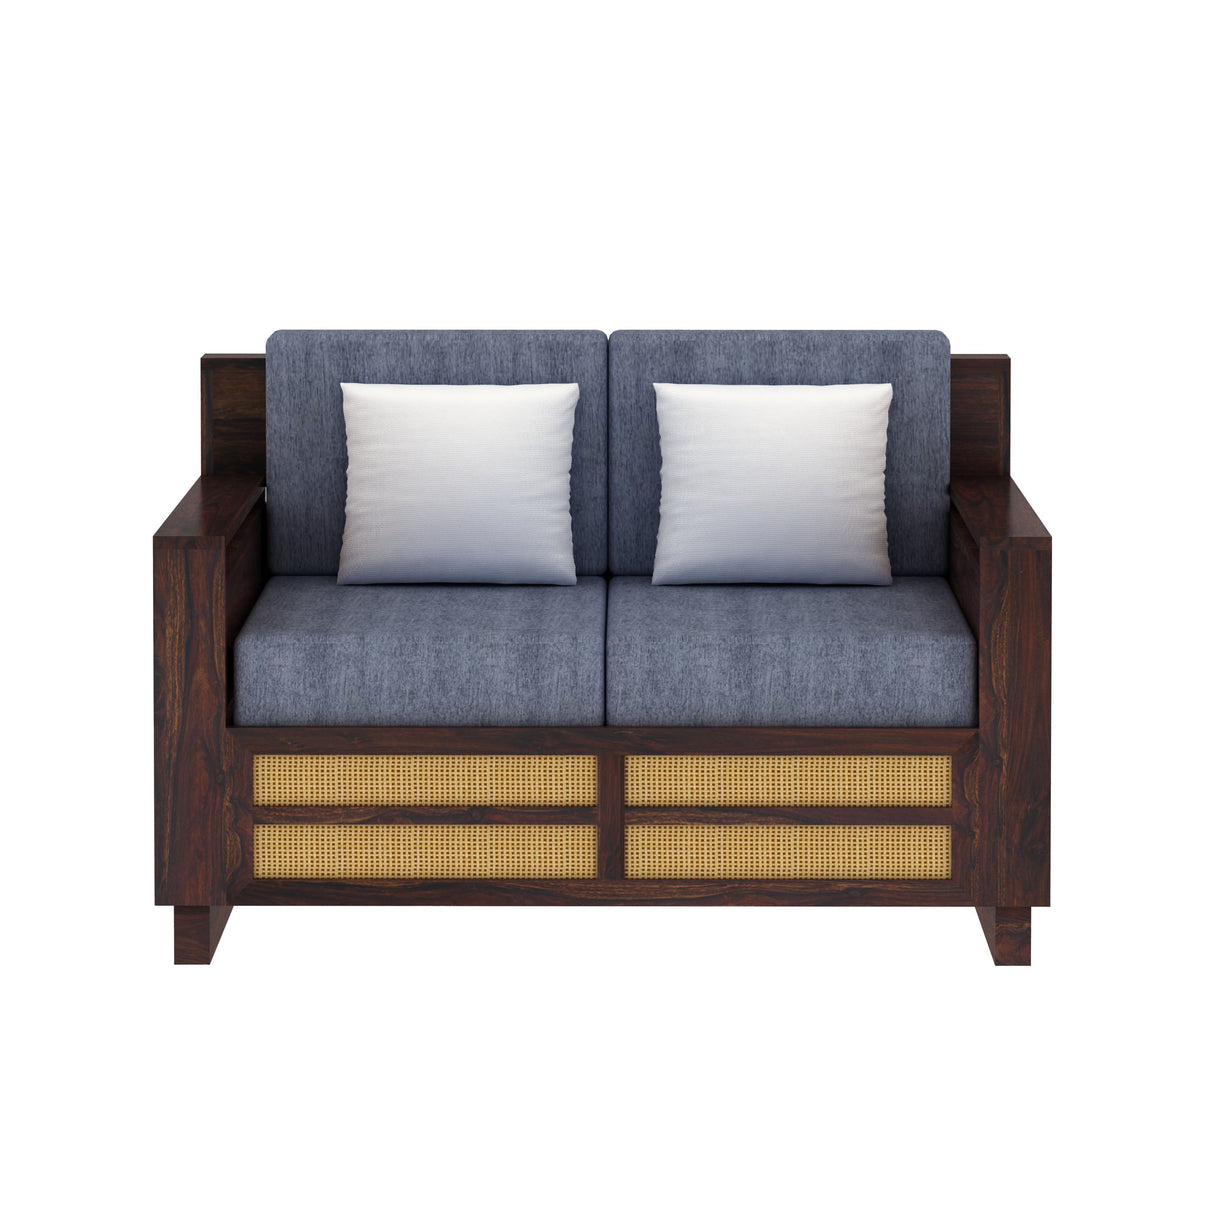 Syrus Solid Sheesham Wood 2 Seater Sofa With Side Pocket and Cane Design -1 Year Warranty